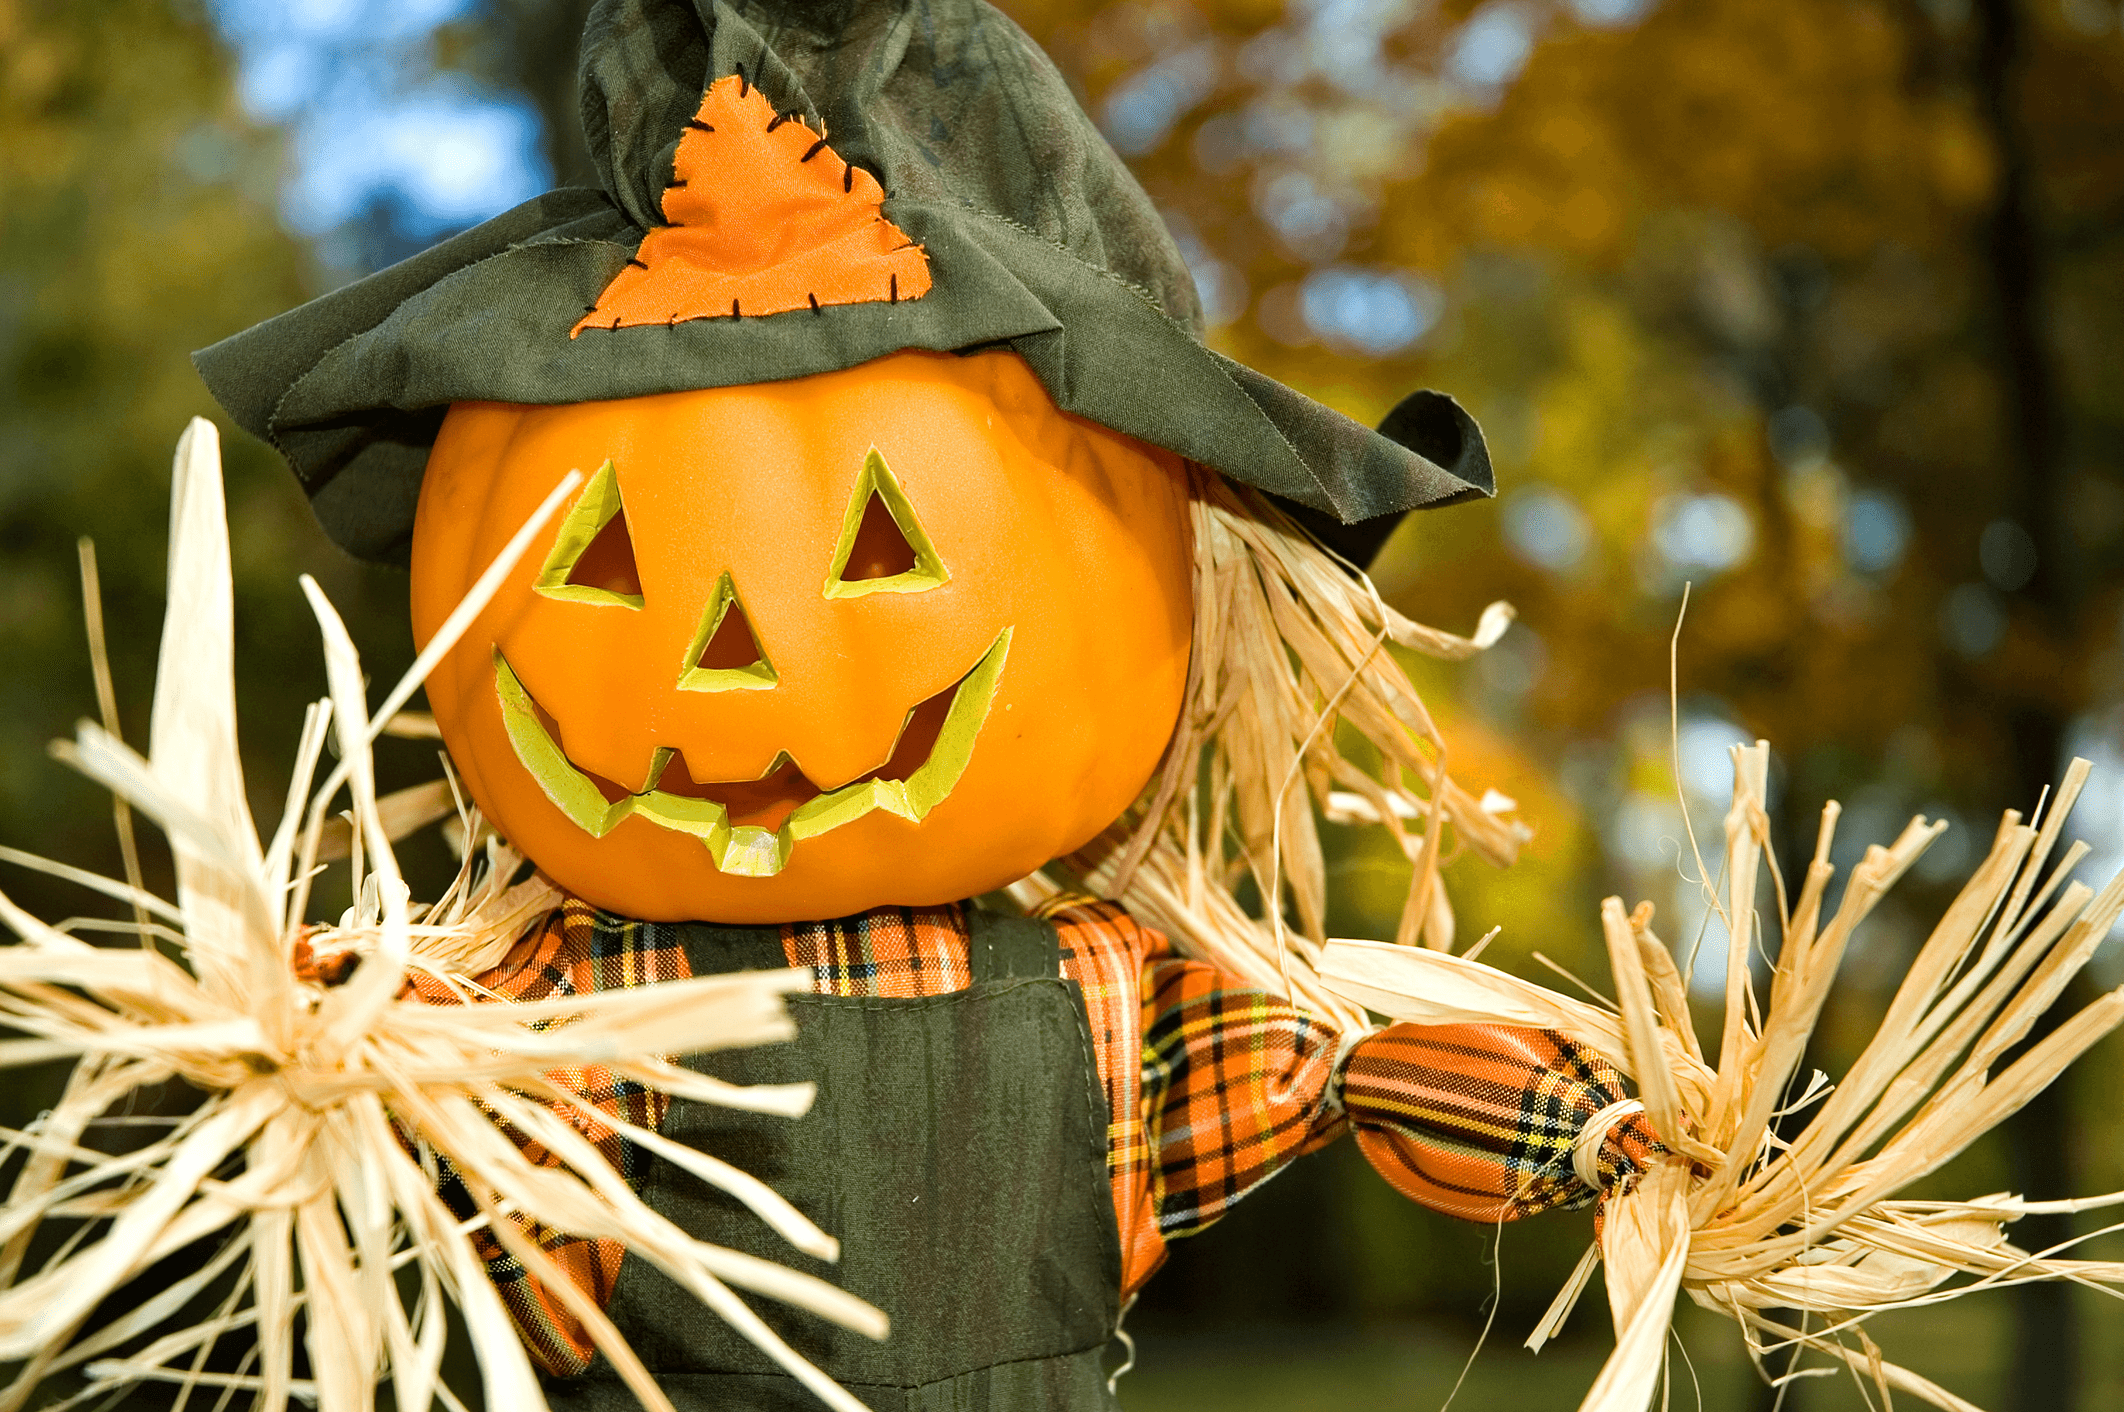 10 Tips To Keep Sugar Under Control Over Halloween